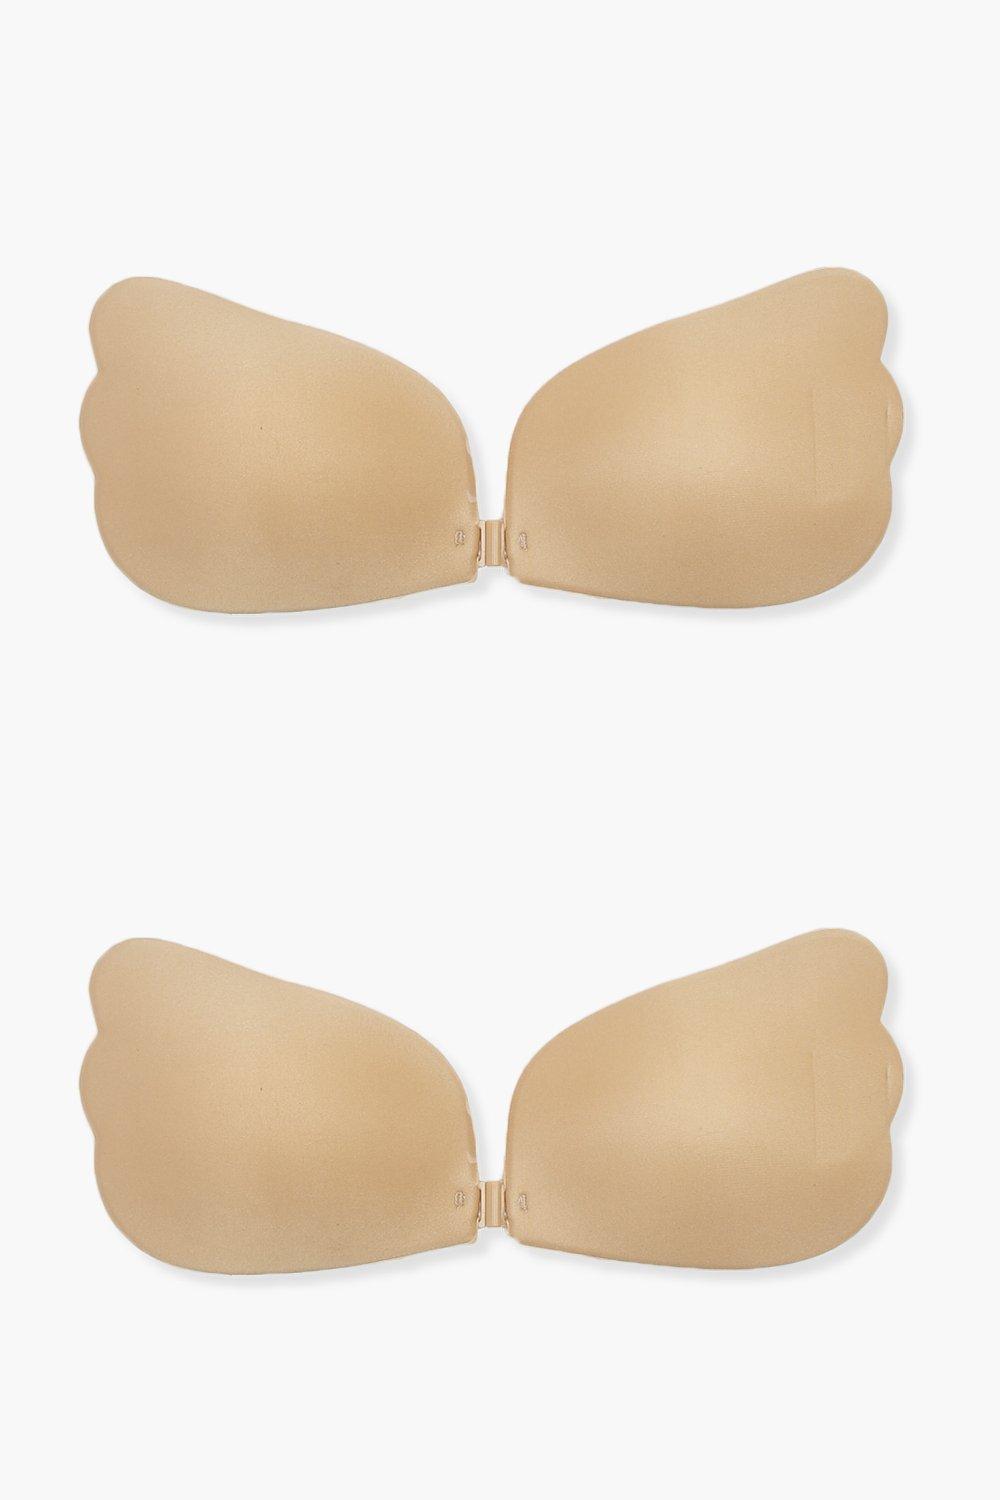 2 Pack Stick On Front Fastening Push Up Bra